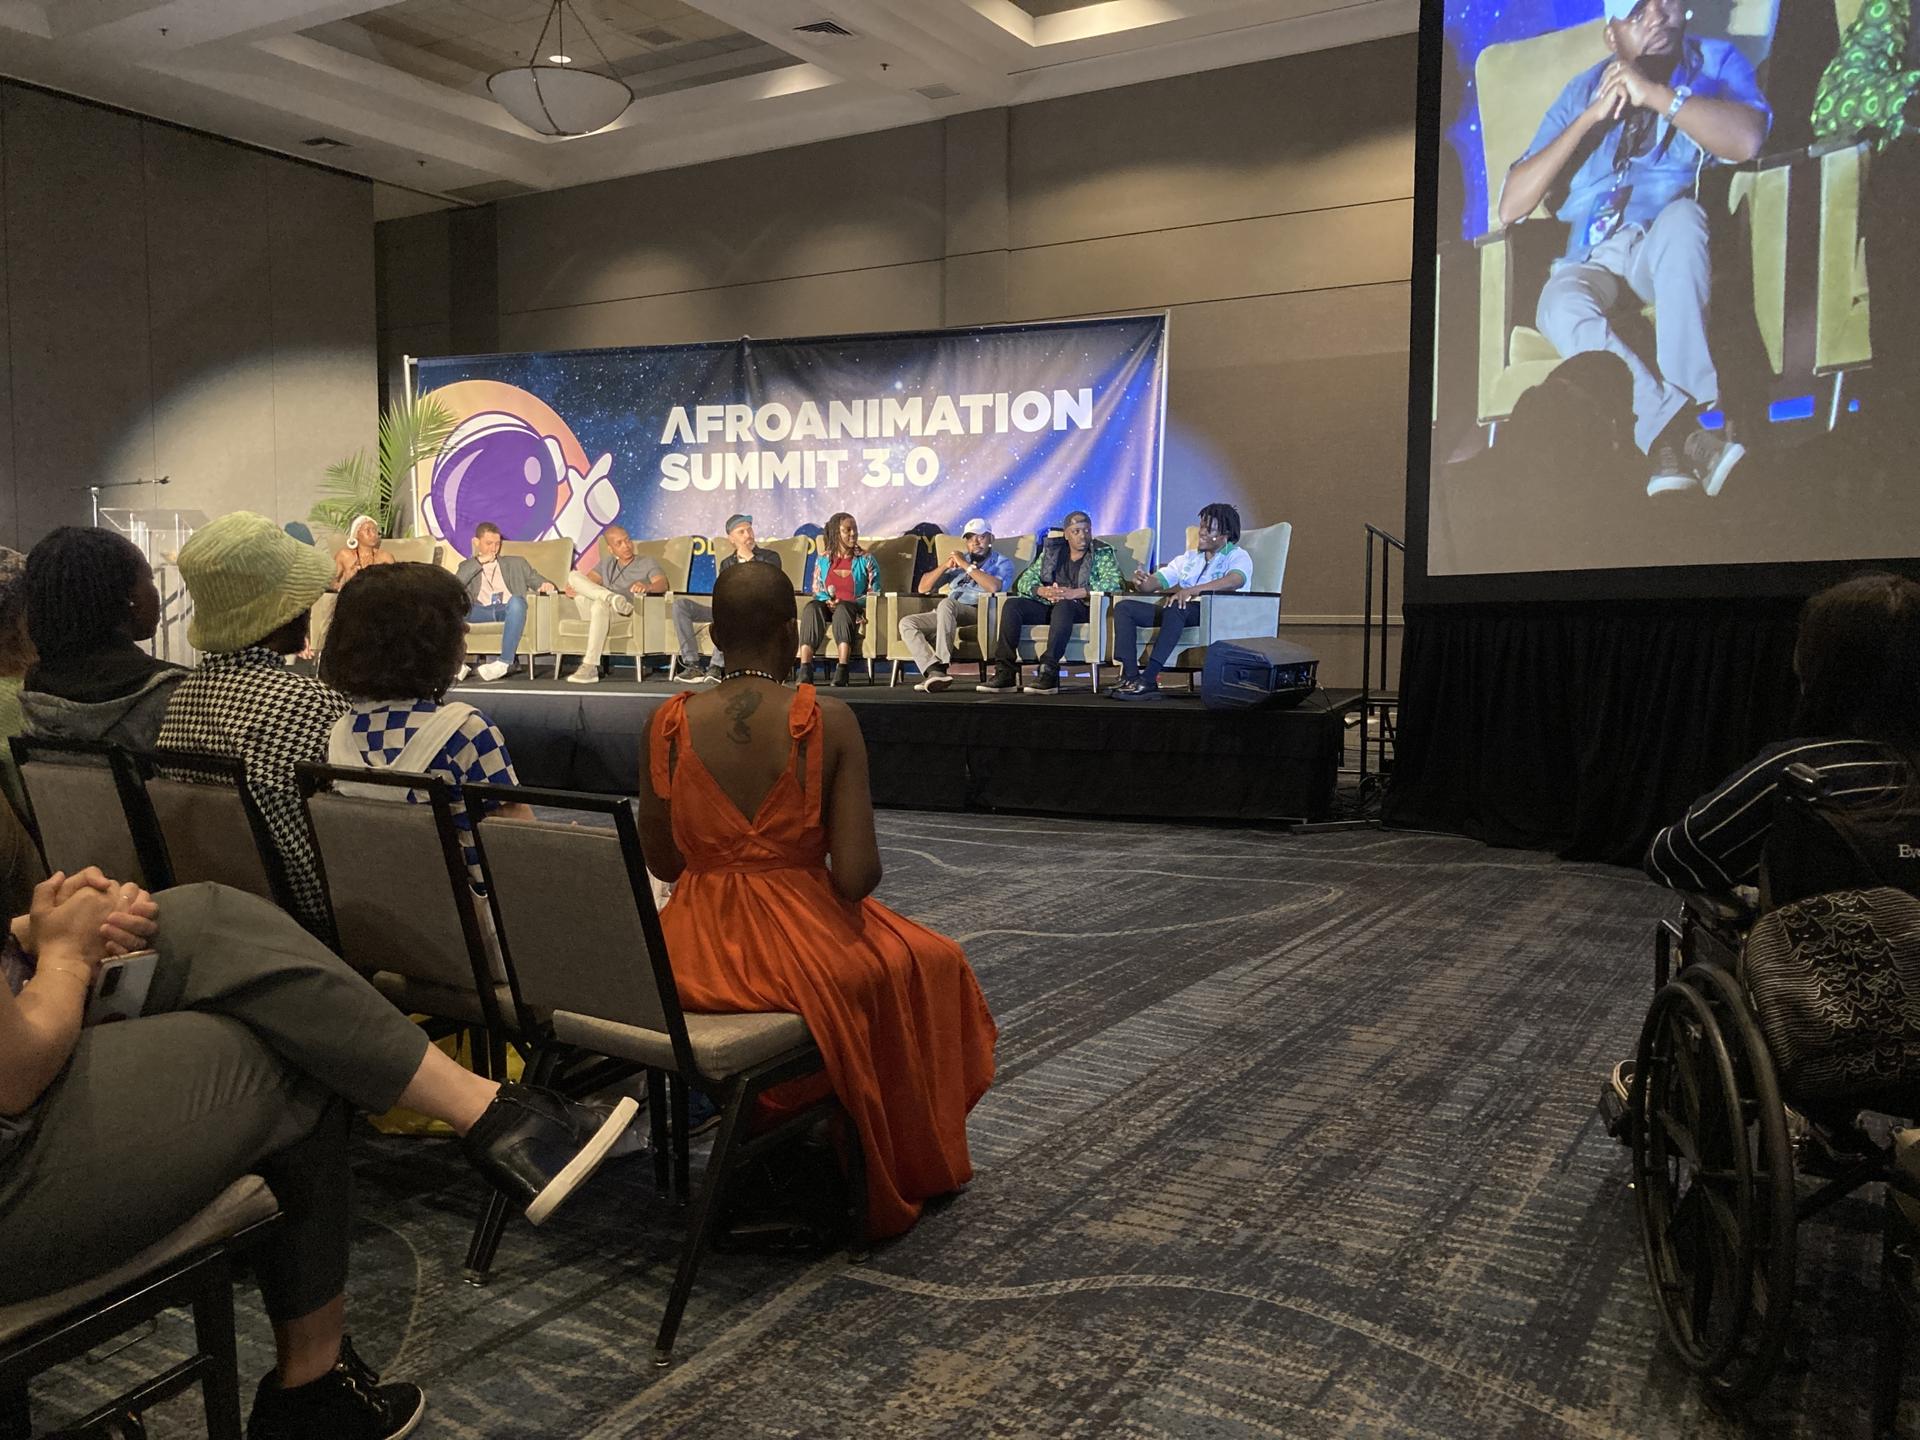 "Kizazi Moto: Generation Fire" Executive Producer Tendayi Nyeke (third from right) moderates a Disney+ panel presentation at the AfroAnimation Summit 3.0 held in Burbank, CA, May 2023.